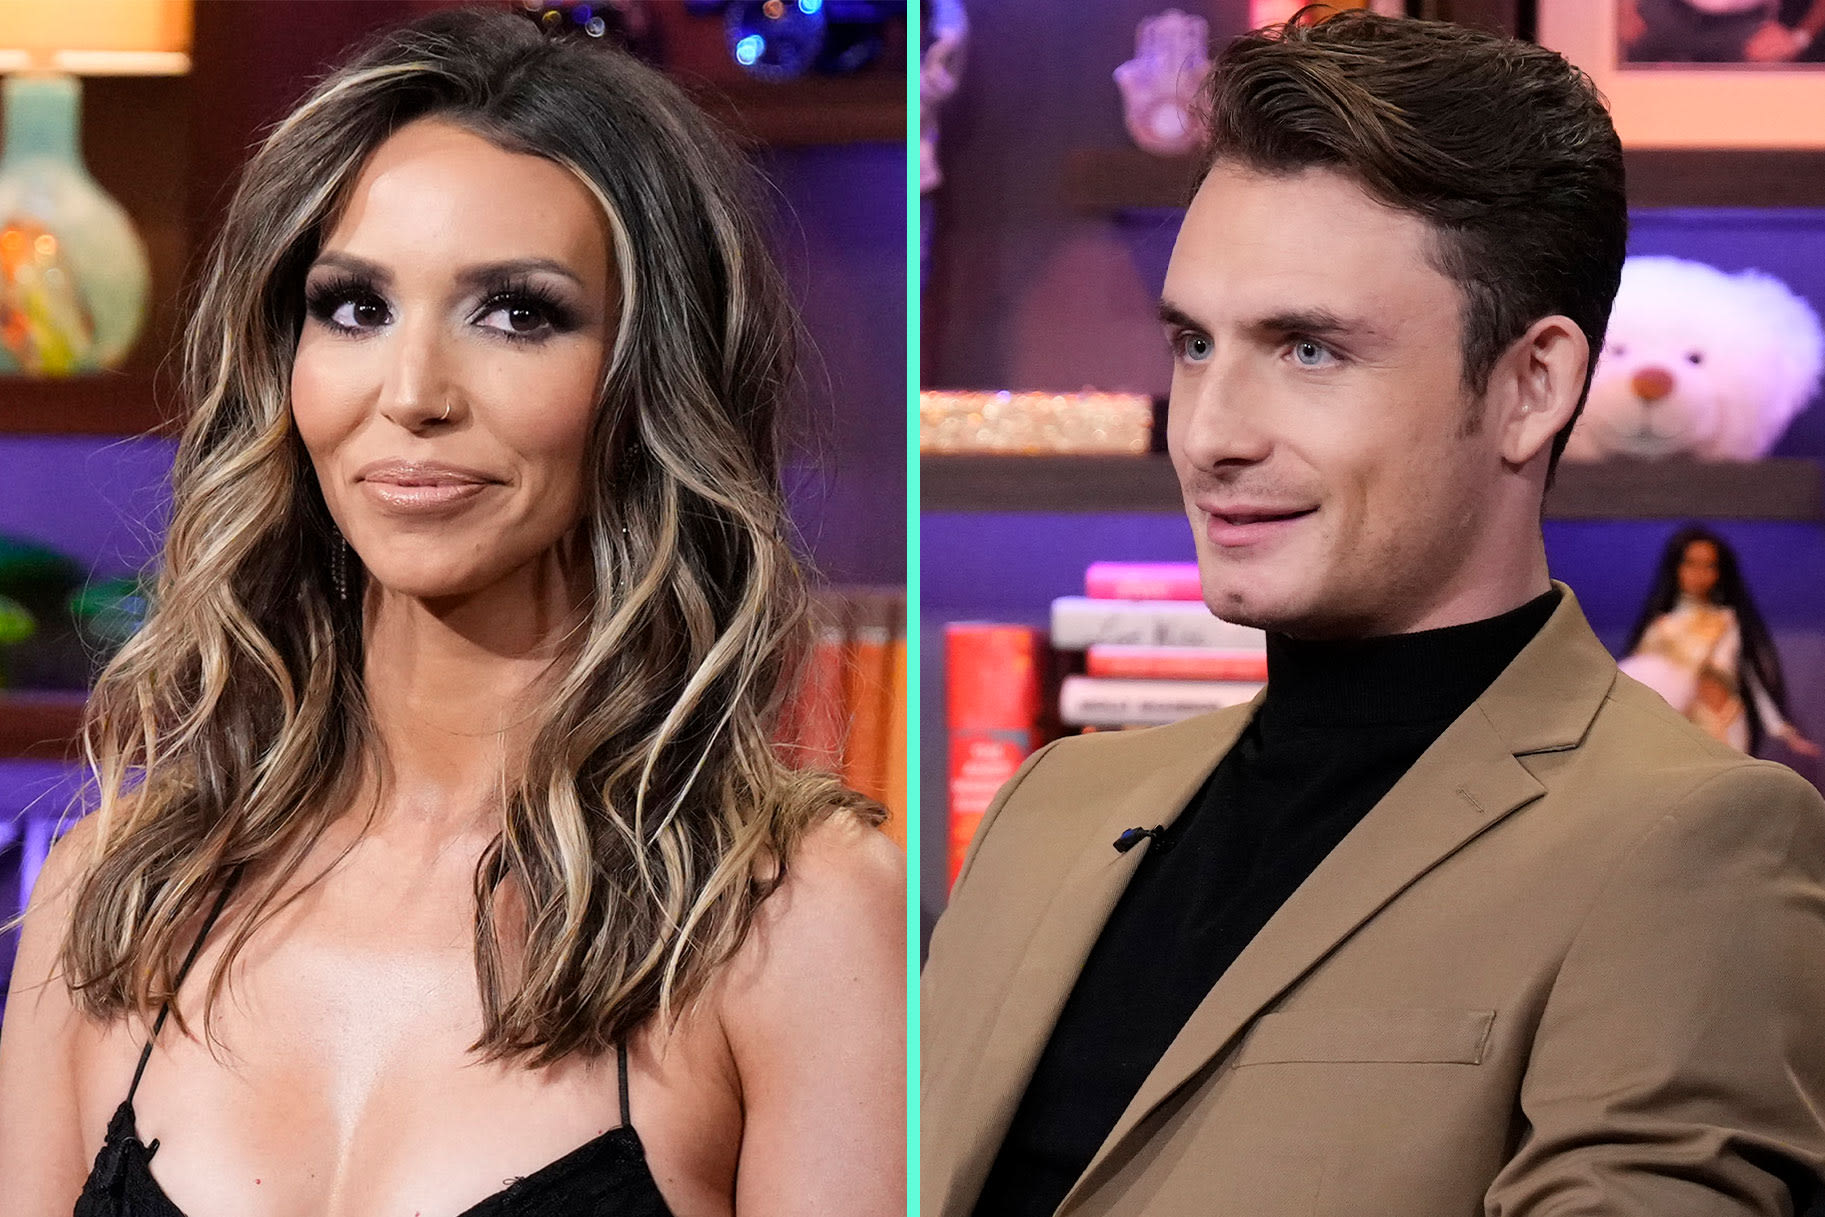 Scheana Shay Addresses the "Scene" of Being "Kicked Out" of James Kennedy's Stagecoach Set | Bravo TV Official Site